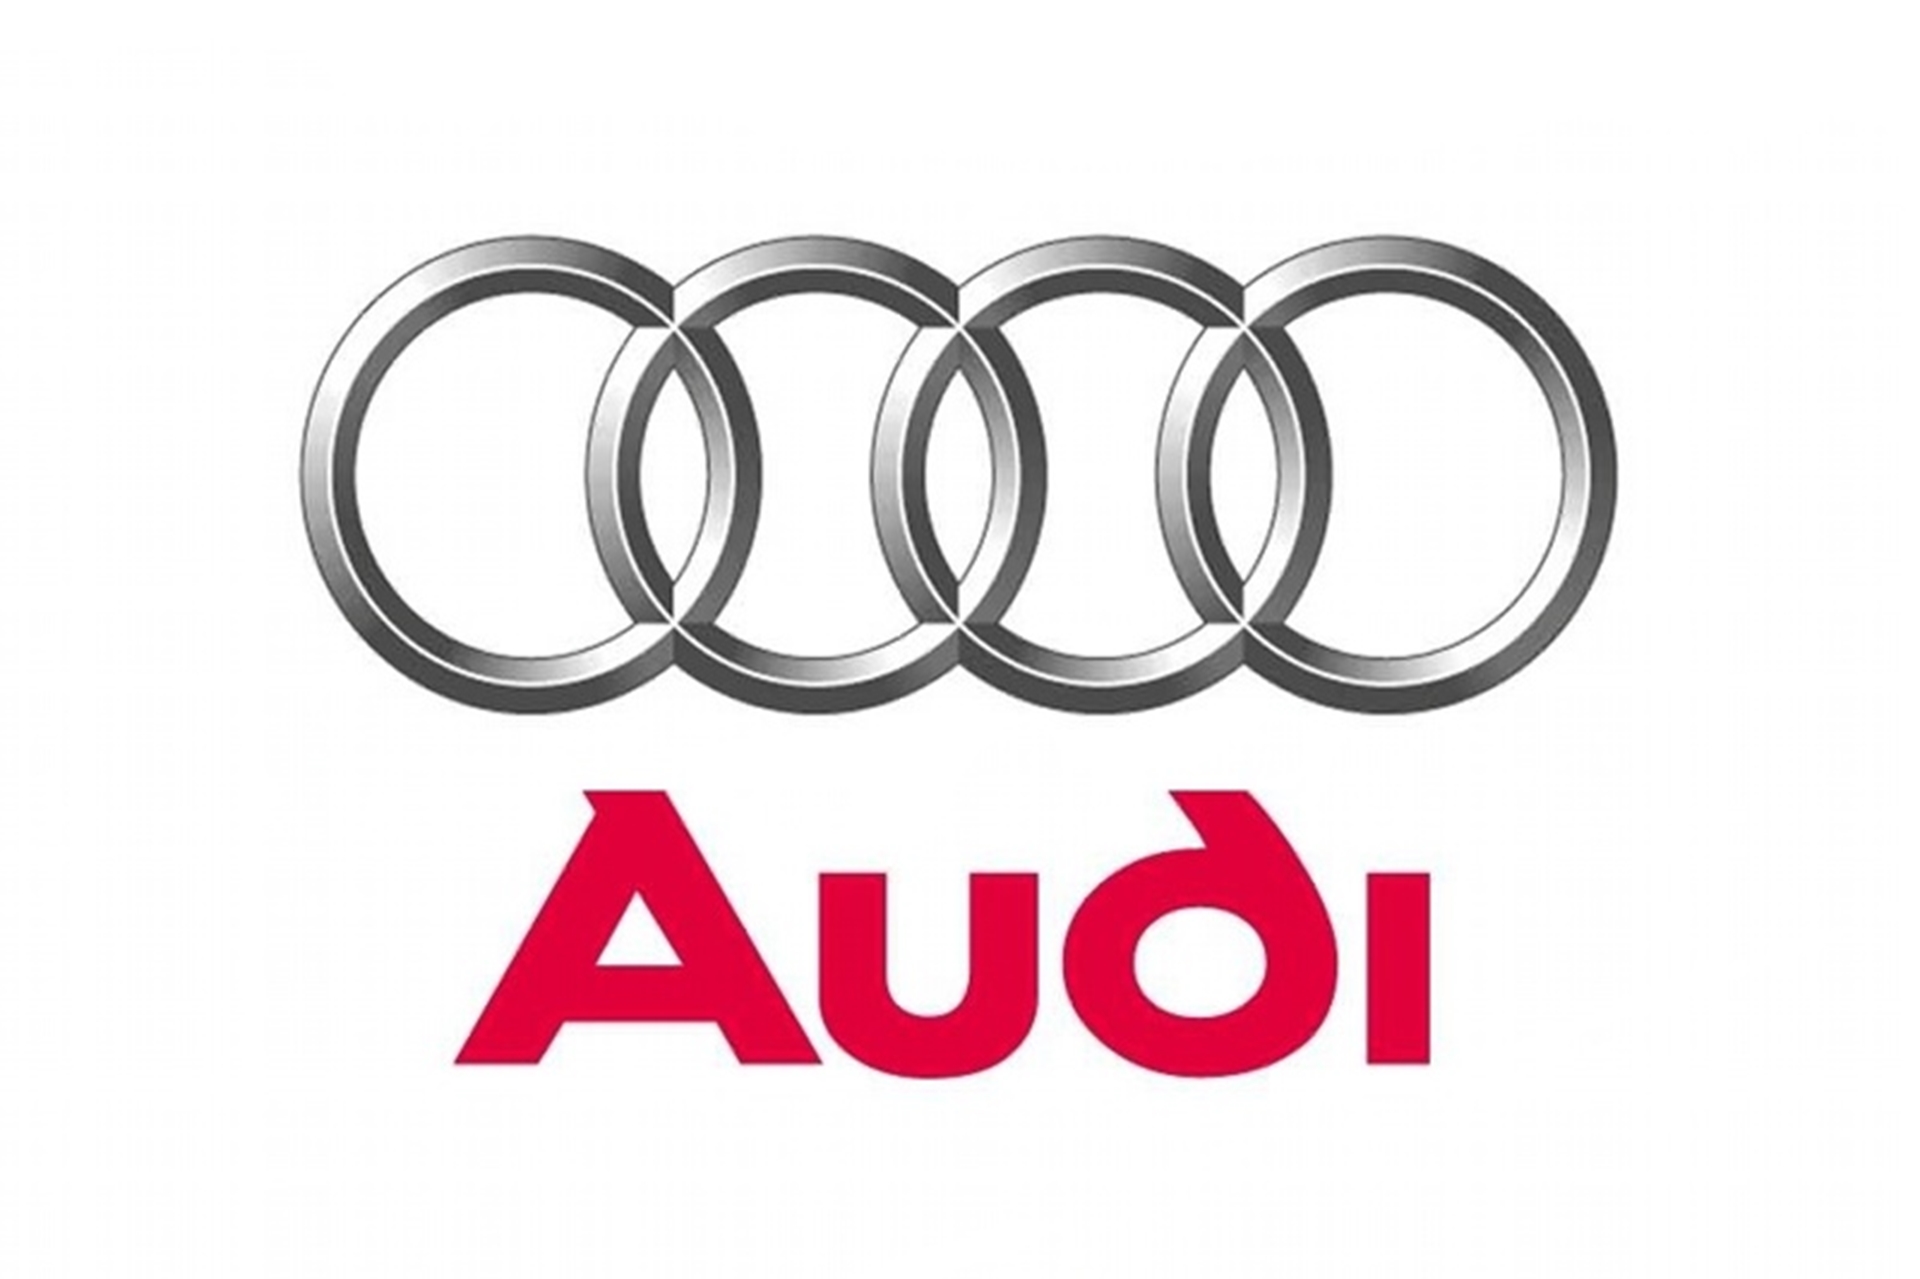 Audi sets all-time U.S. monthly sales record with 26% gain in June